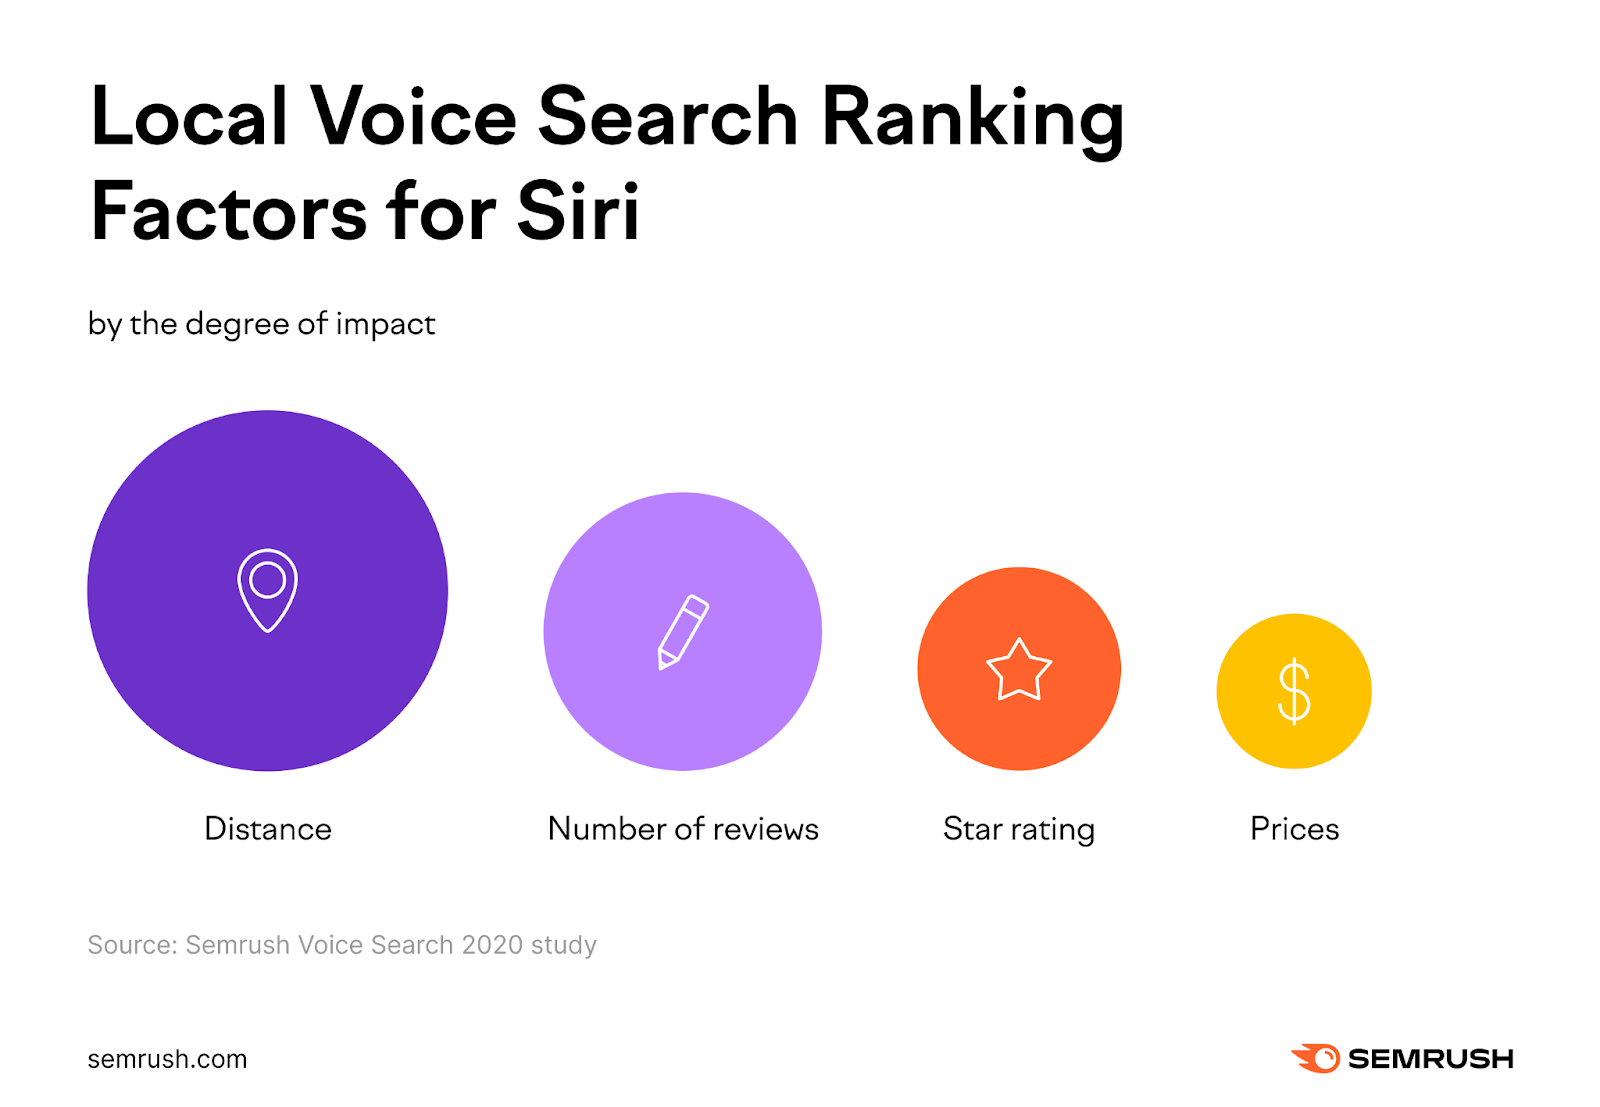 An infographic by Semrush listing local voice search ranking factors for Siri